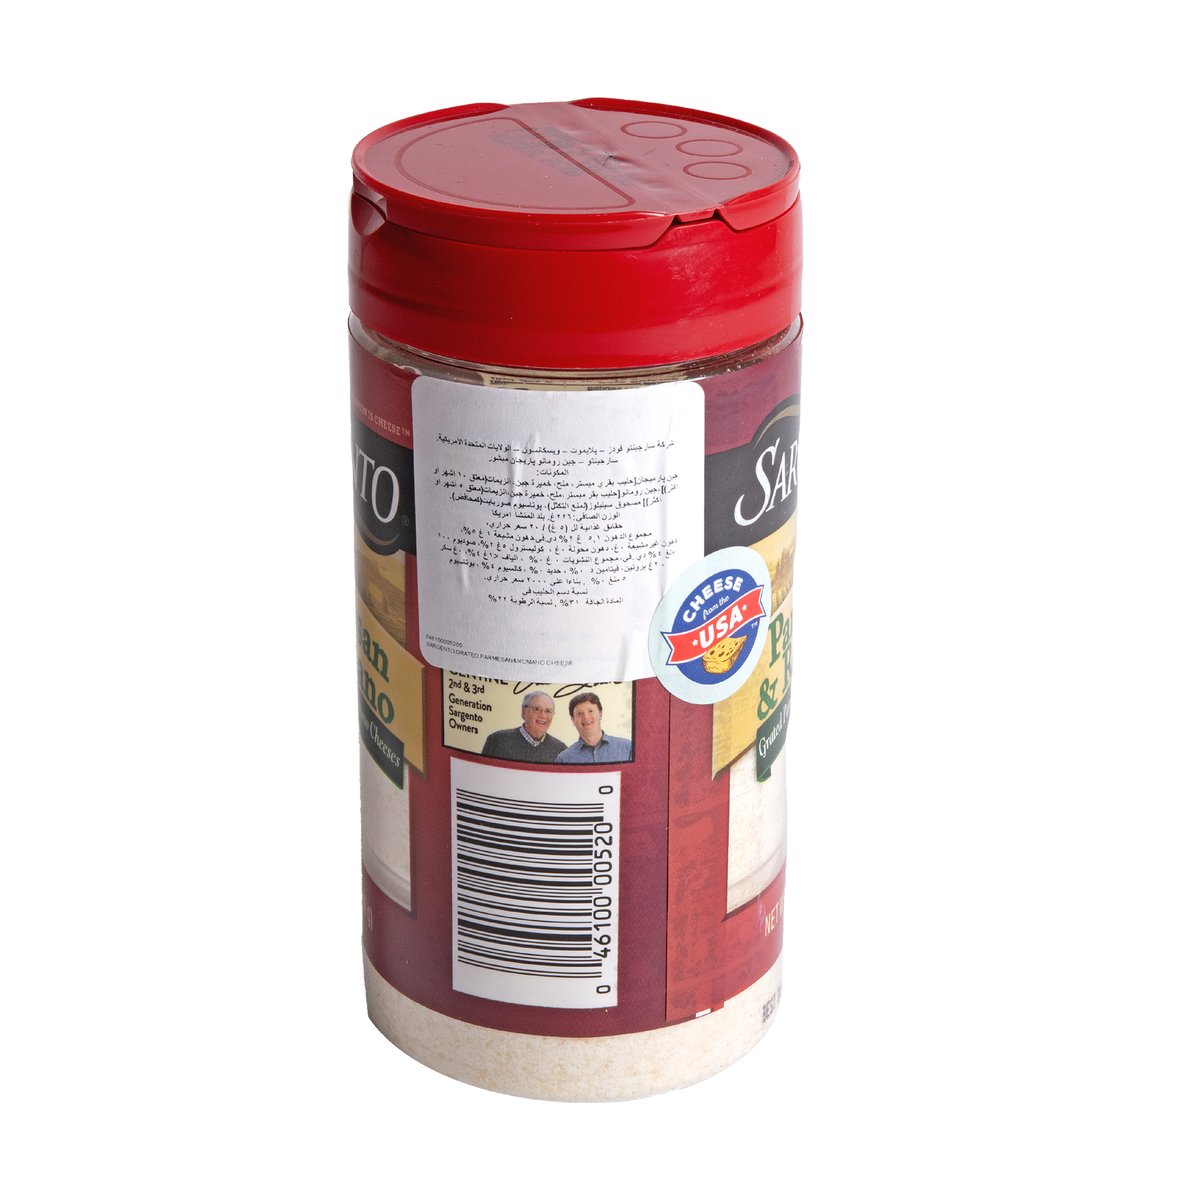 Sargento Grated Parmesan & Romano Cheese 226 g